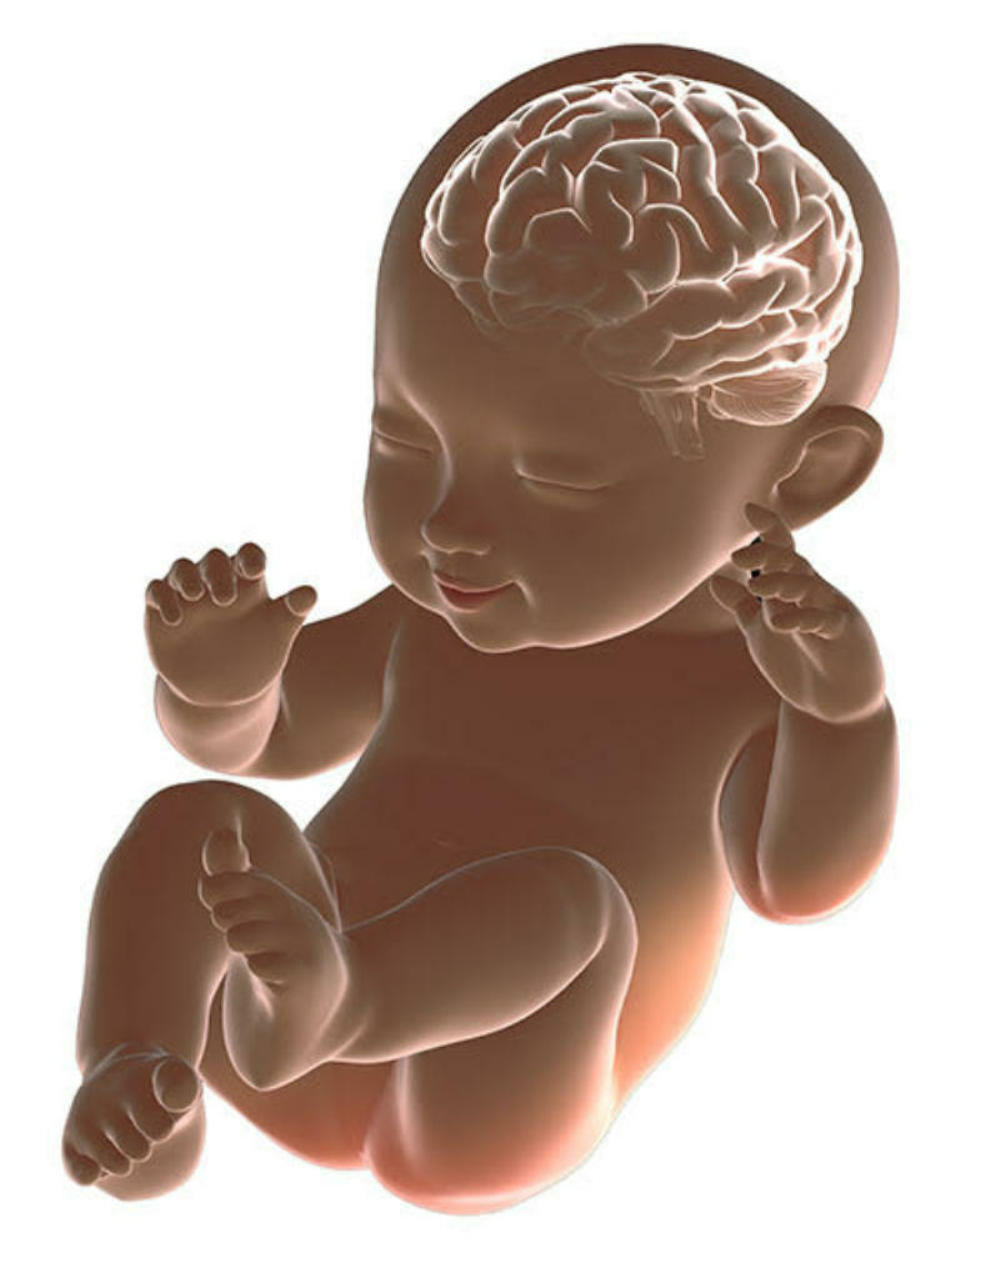 Domestic Violence And Baby Brain Development: What You Need To Know